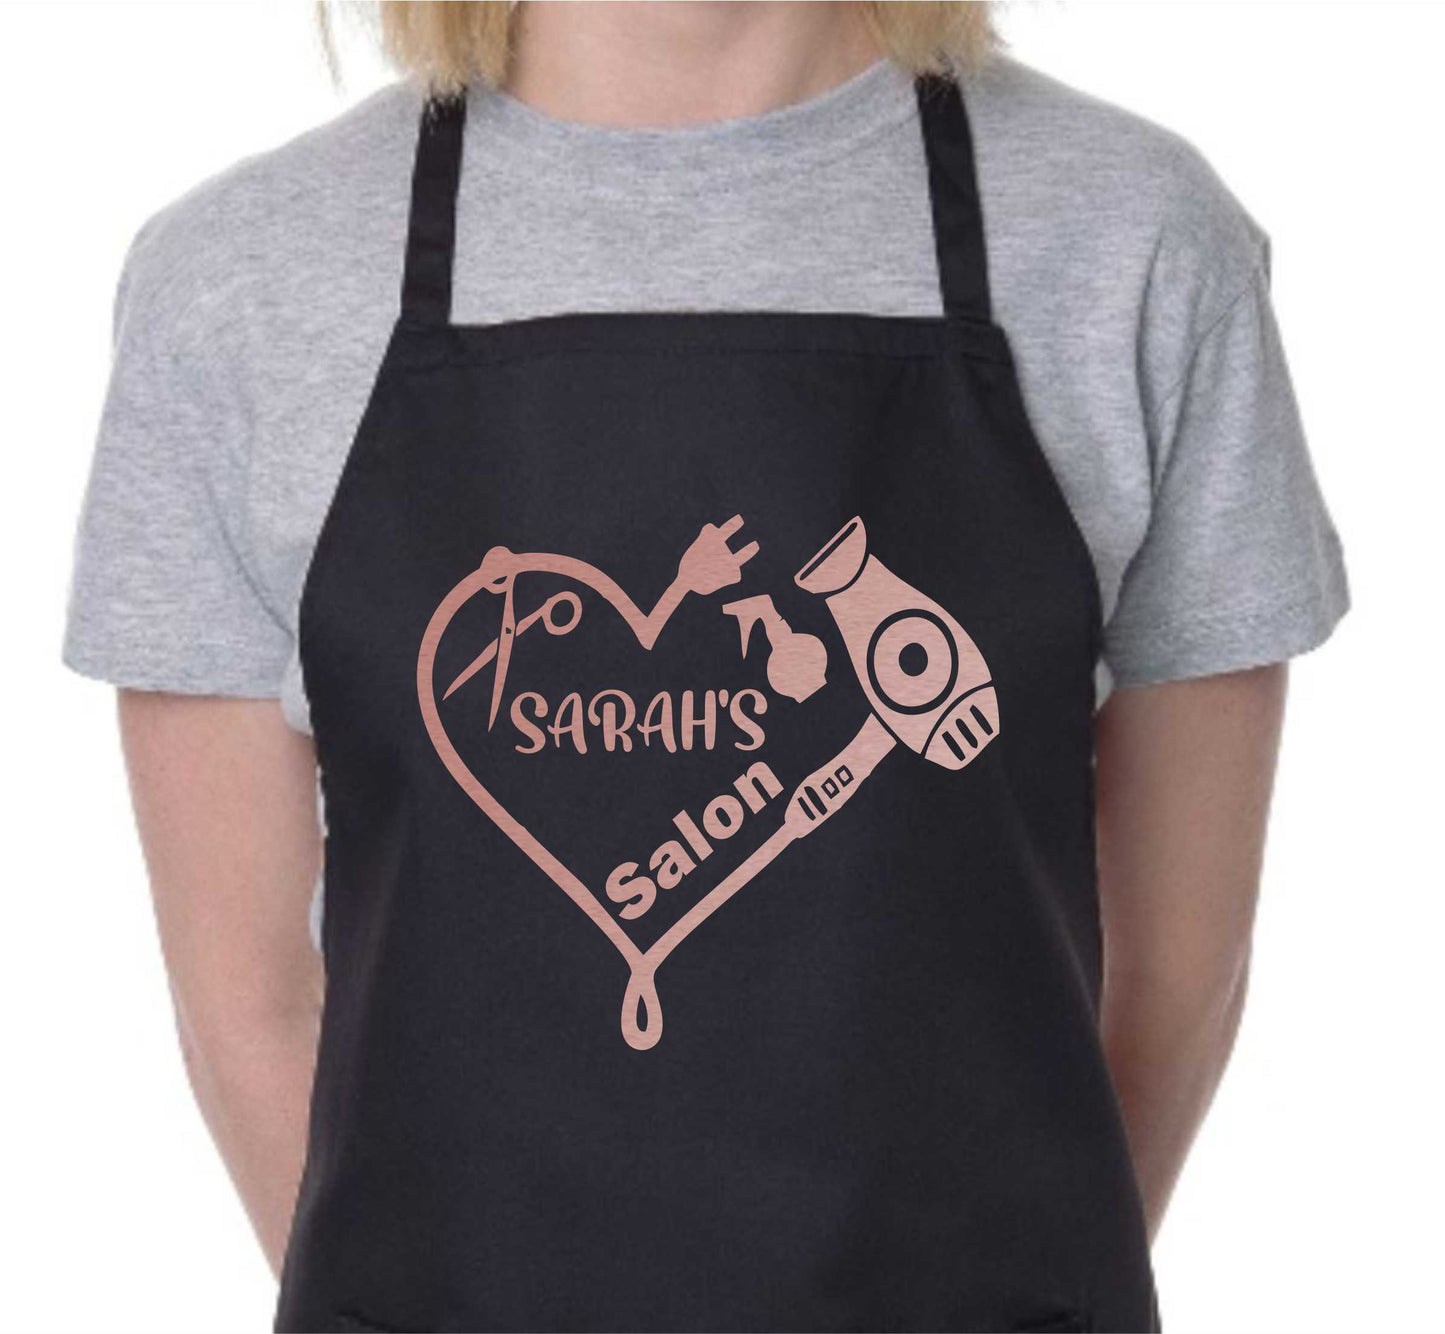 Personalised Apron Hairdresser Beauty Salon Your Name Here Work Gift